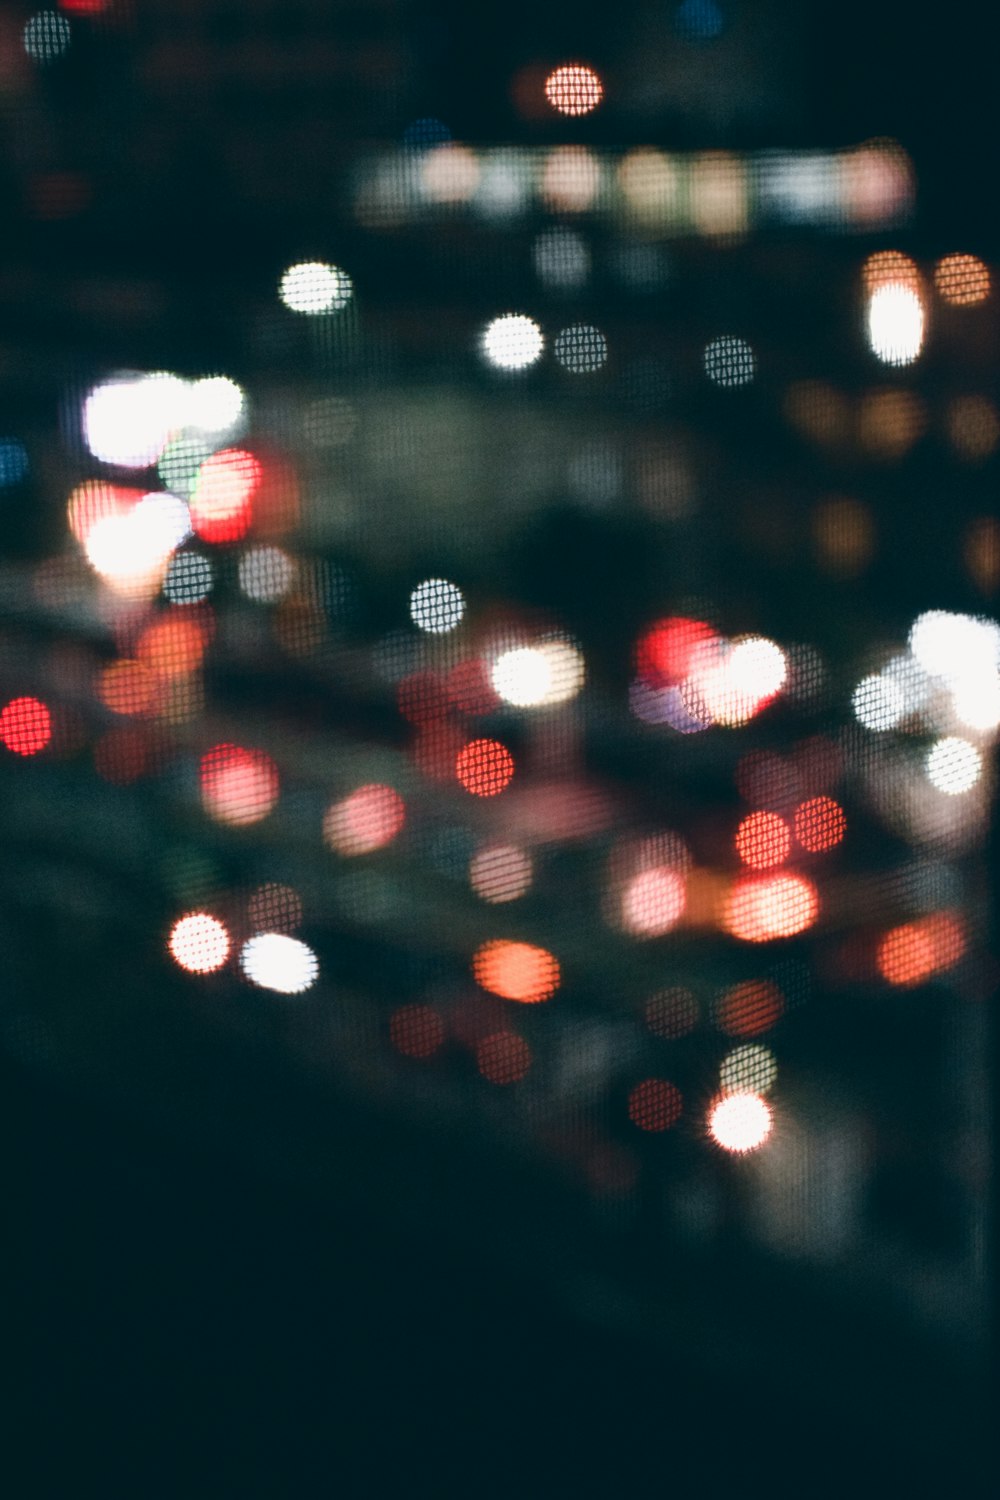 water droplets on glass window during night time